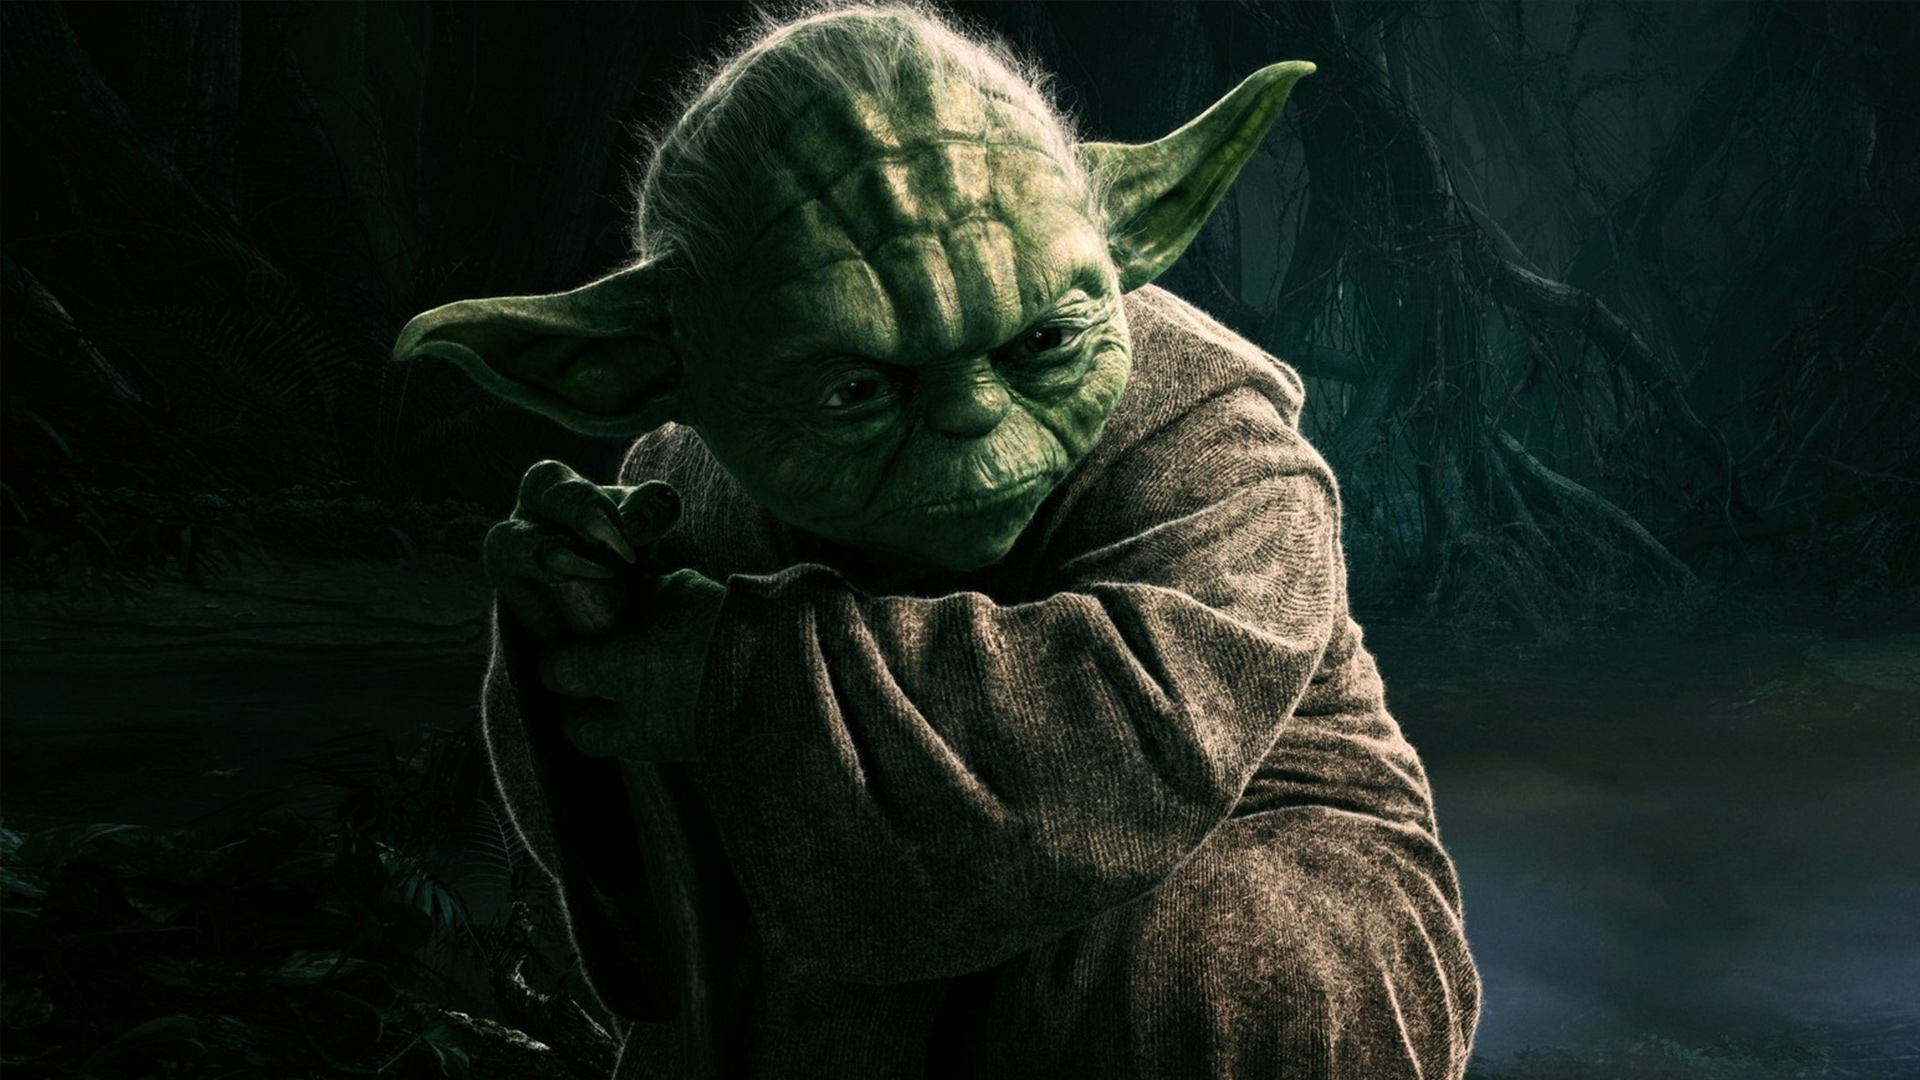 Almost in 'Star Wars: The Force Awakens,' Yoda was